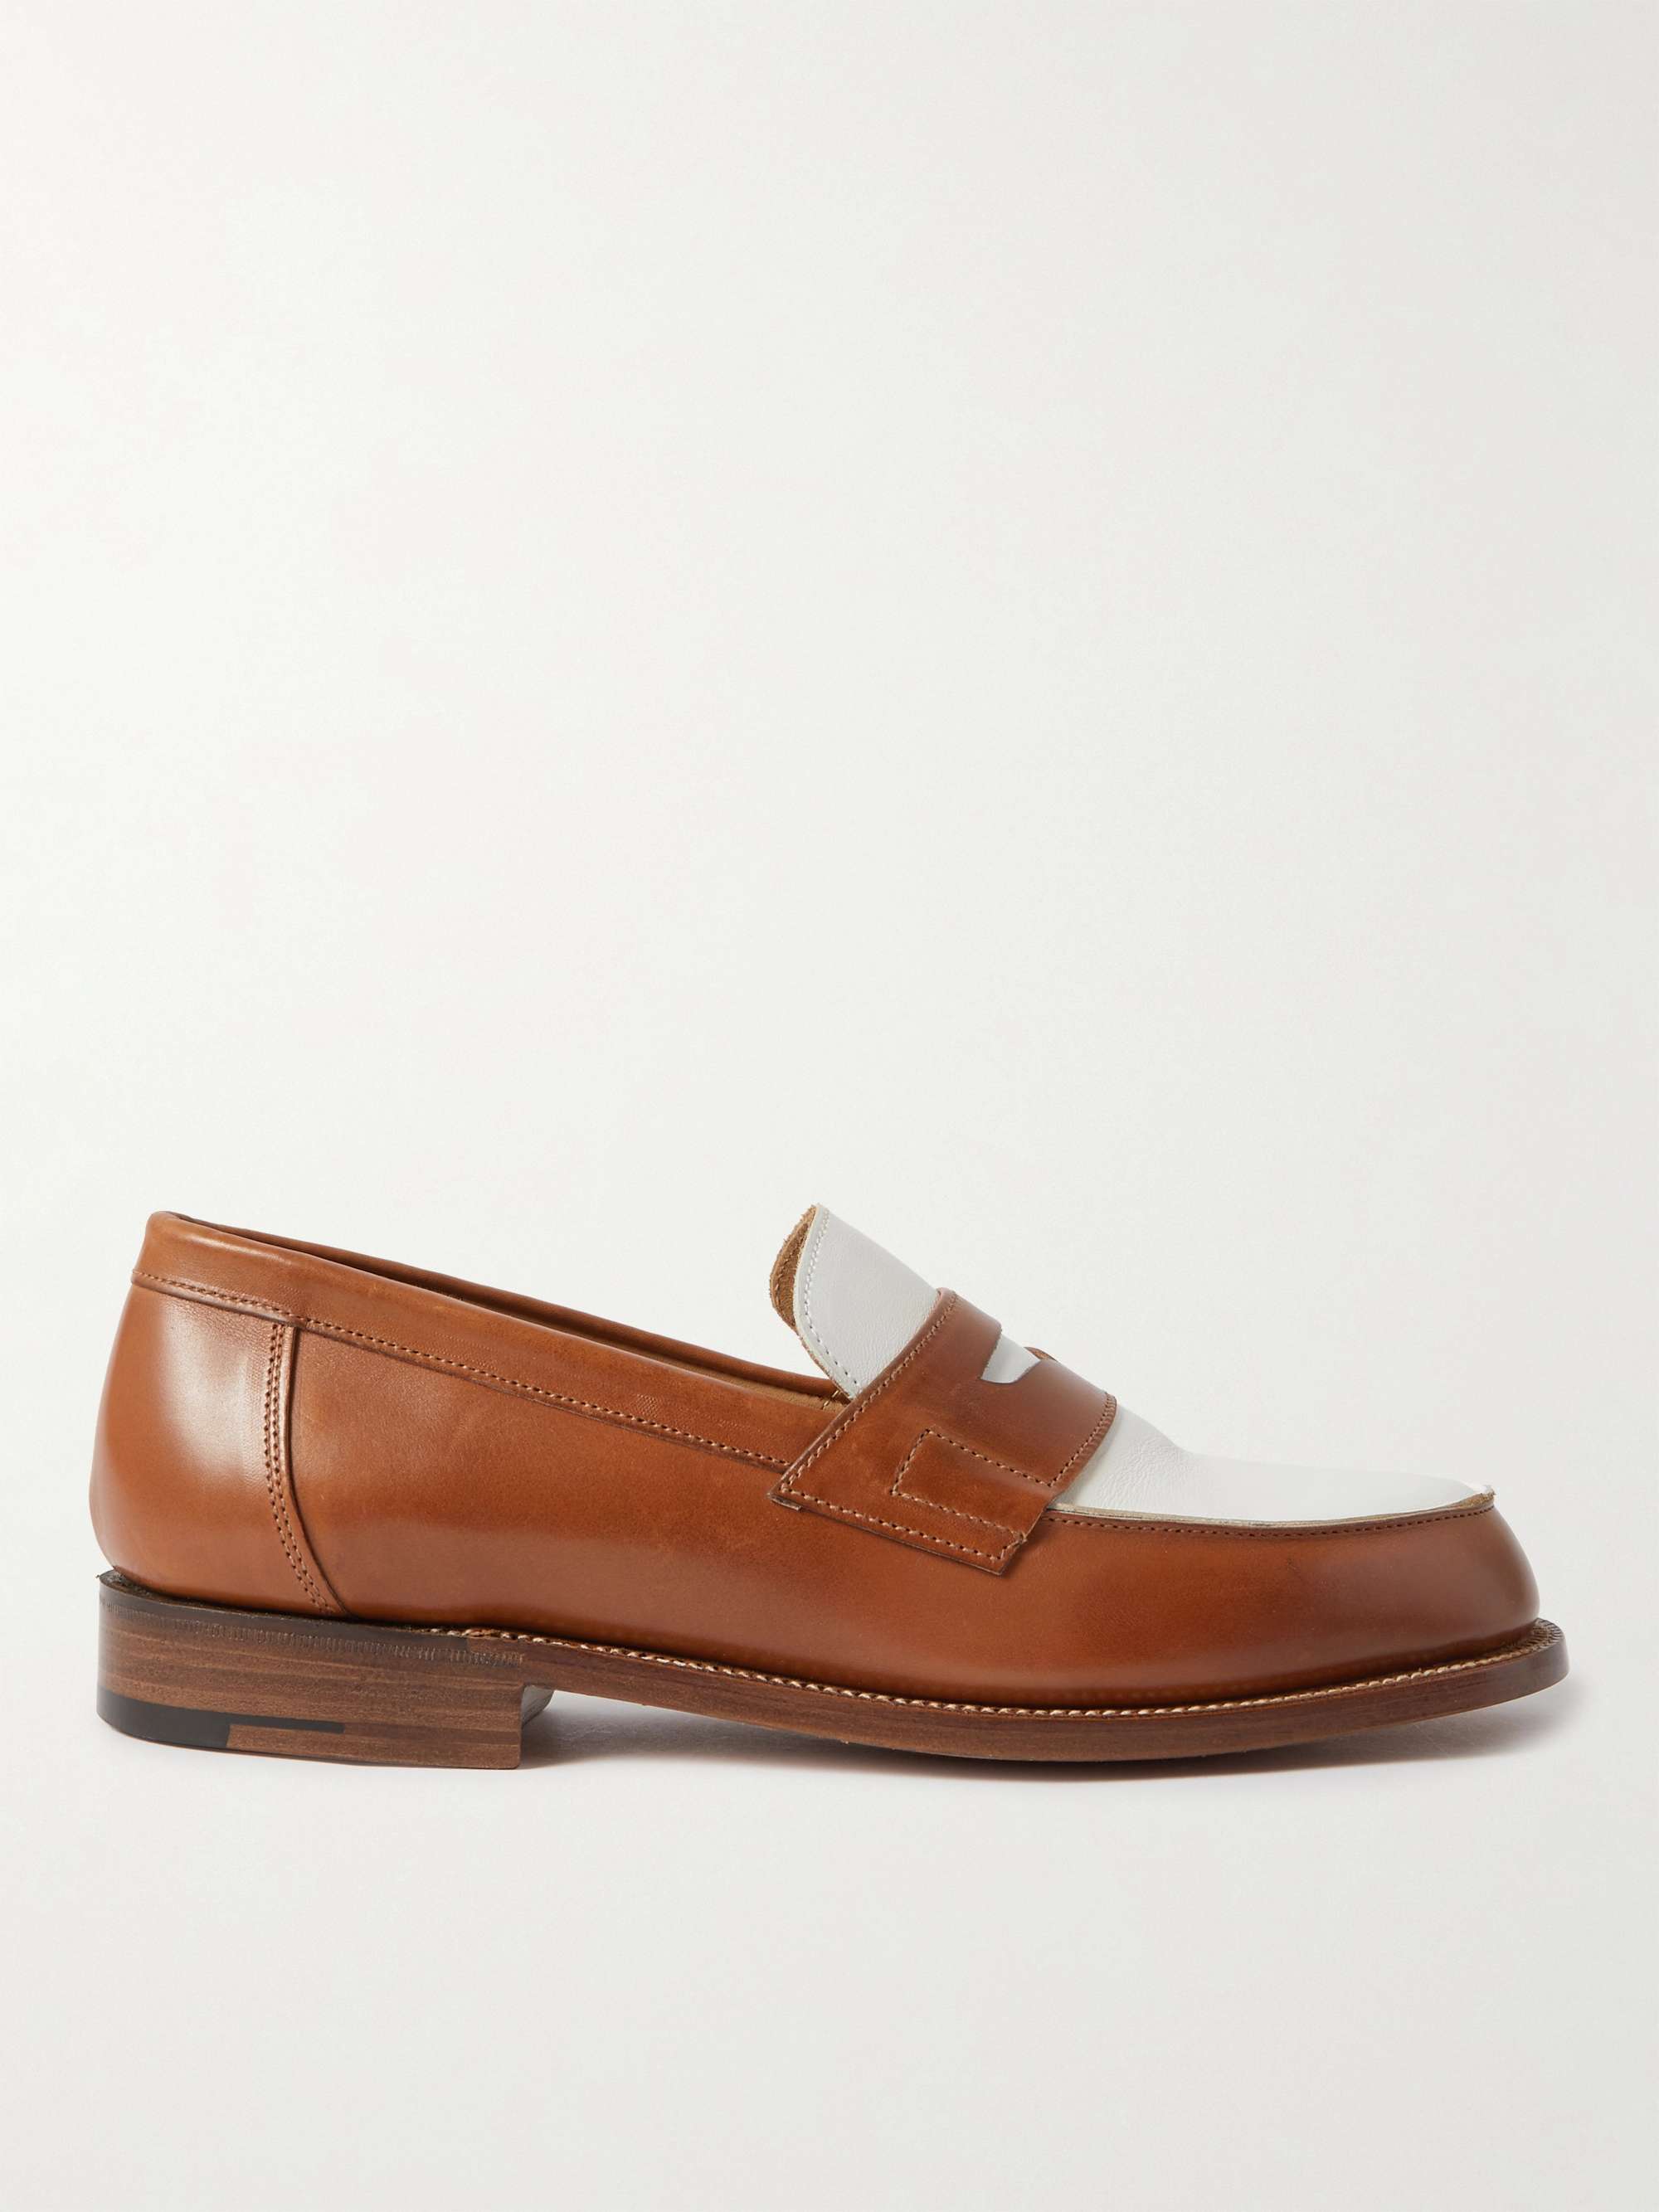 GRENSON Epsom Two-Tone Leather Penny Loafers